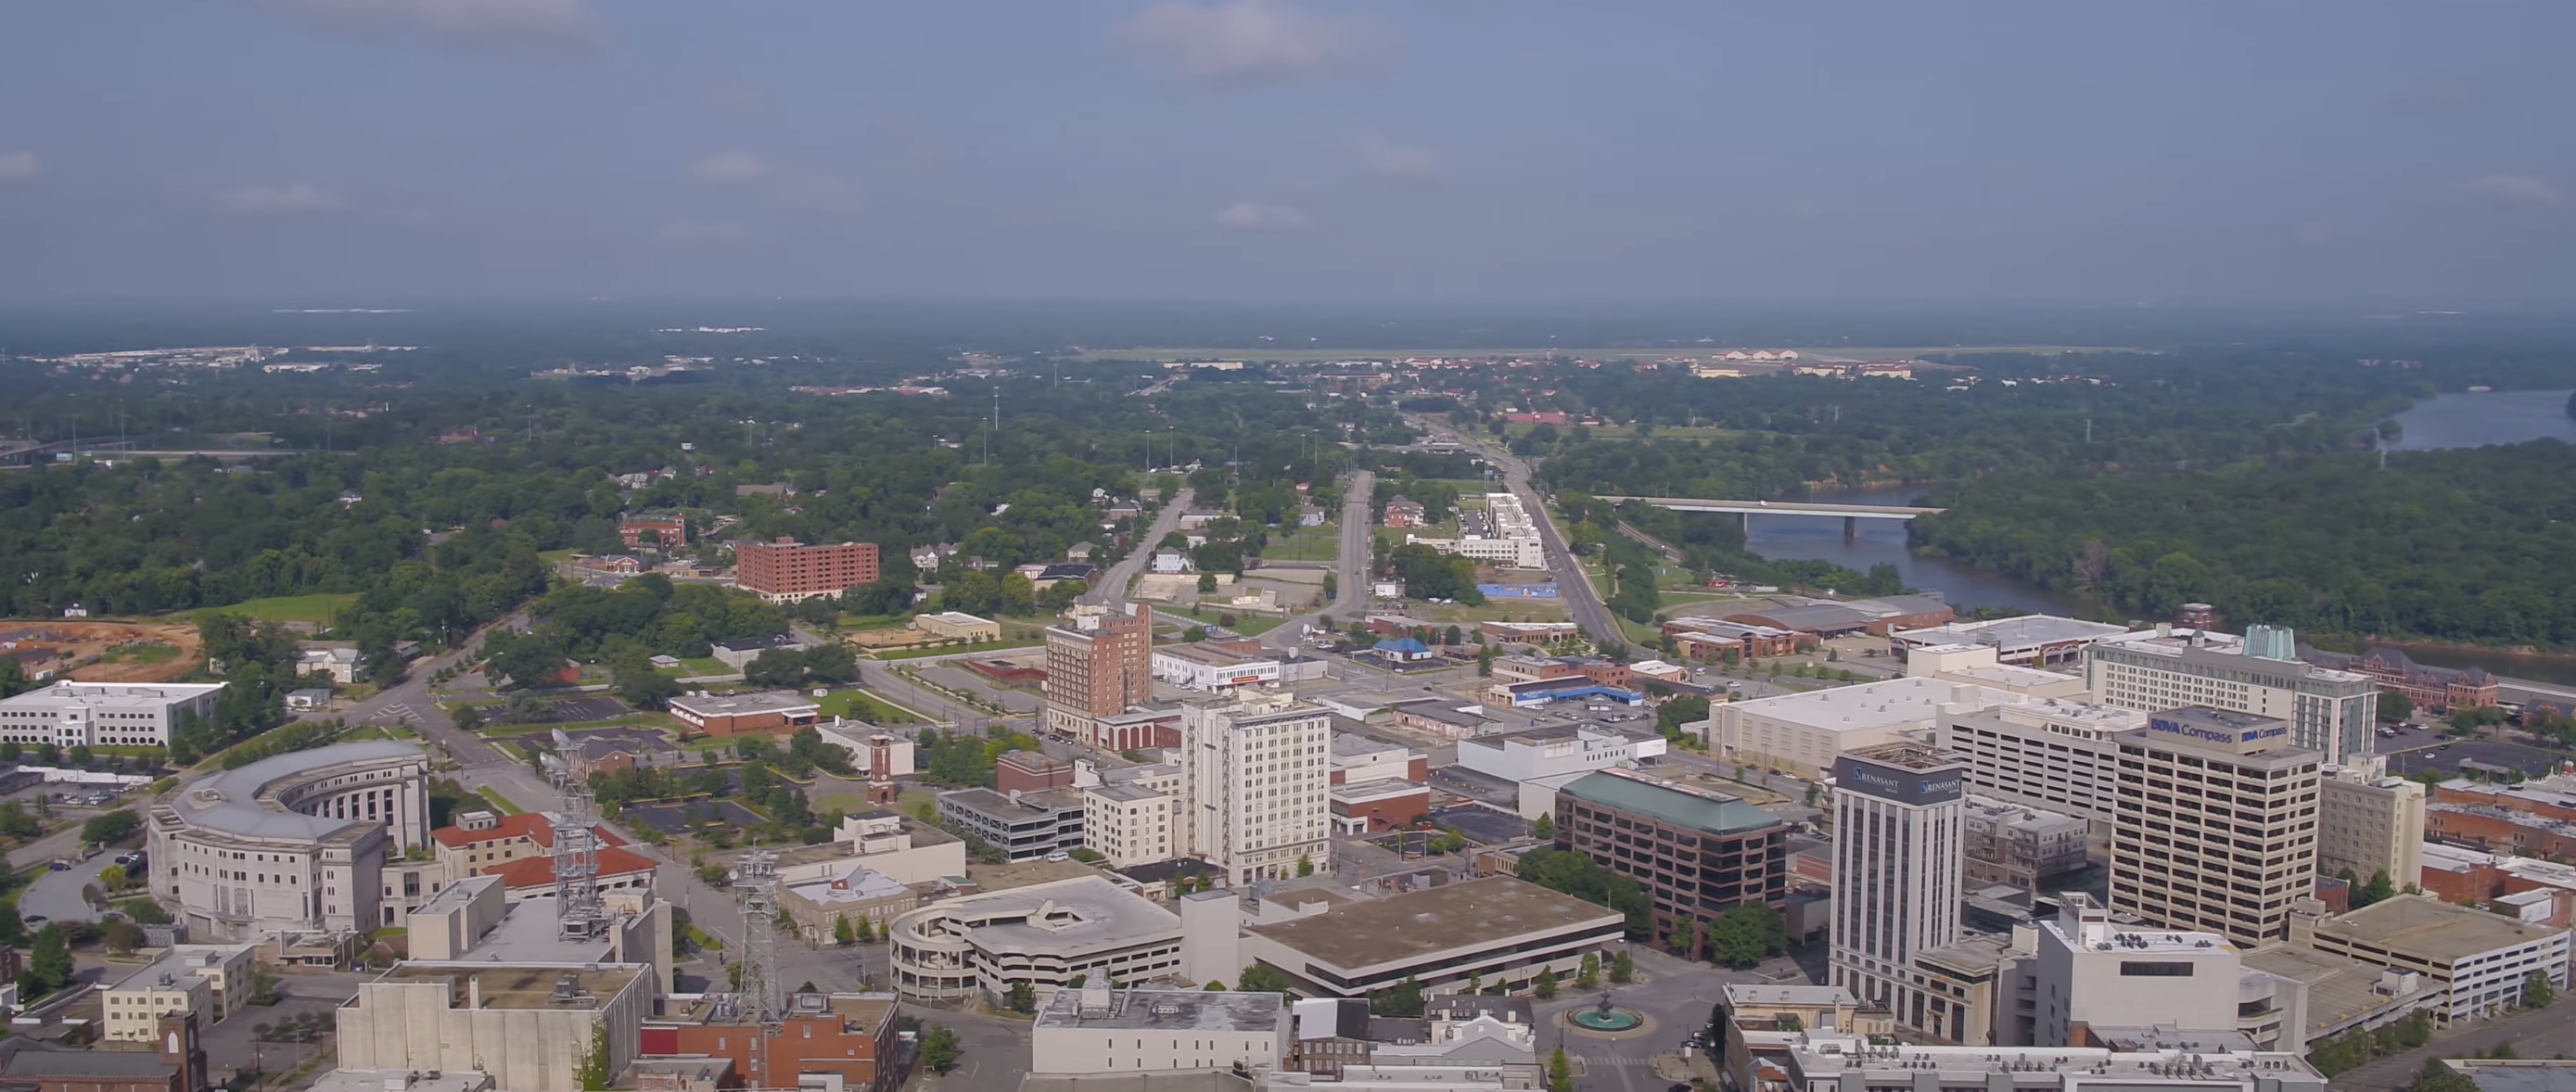 Montgomery aerial view